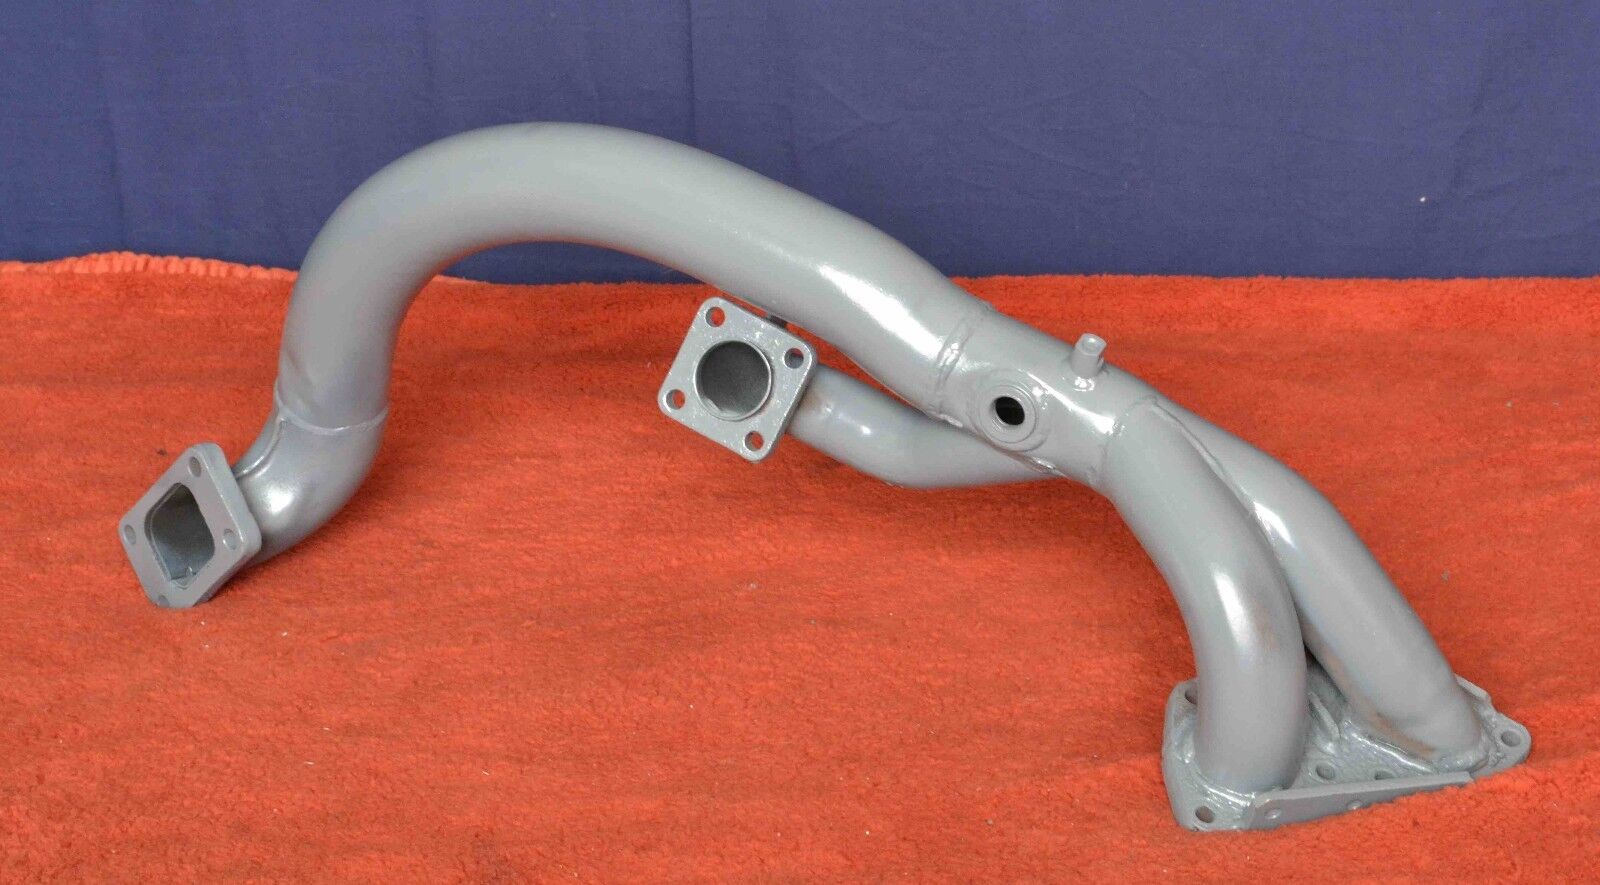 Porsche 911 turbo 930 Y-Pipe Exhaust turbo Charger Manifold 930.111.003.02 nice